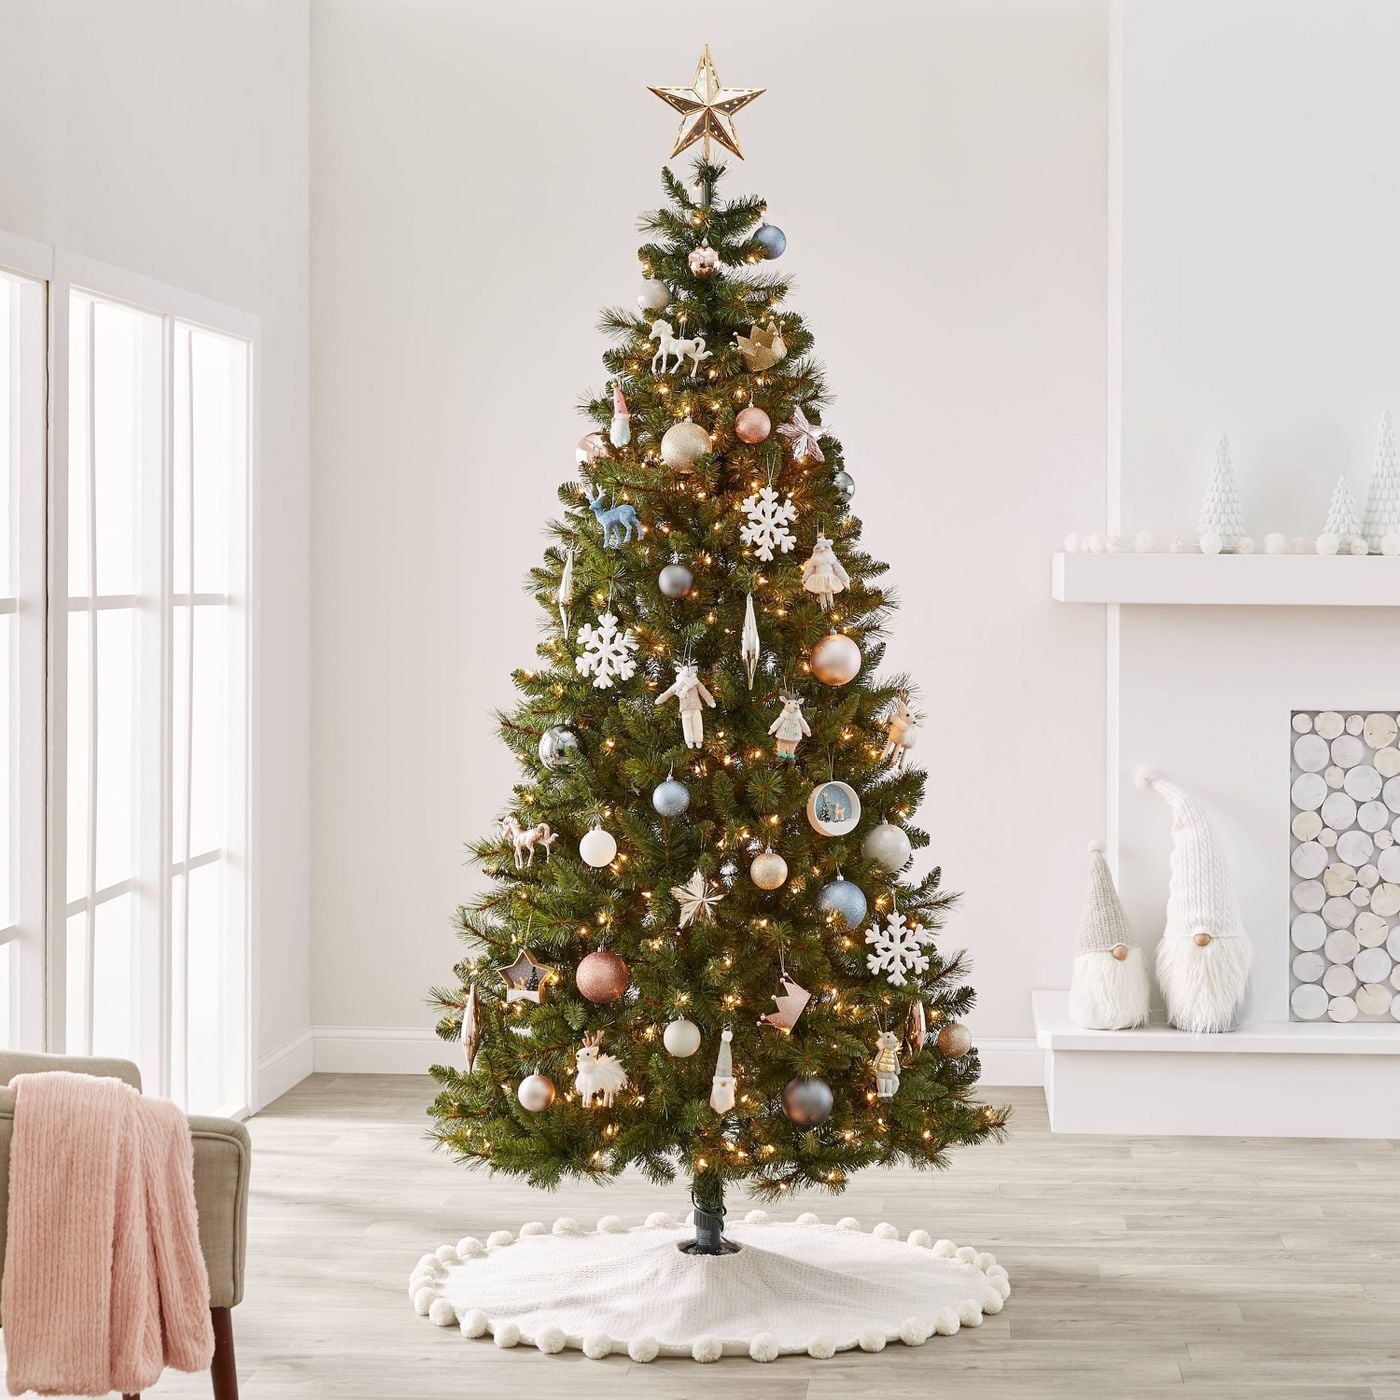 Target Is Selling Themed Christmas Tree Decorating Kits | POPSUGAR ...